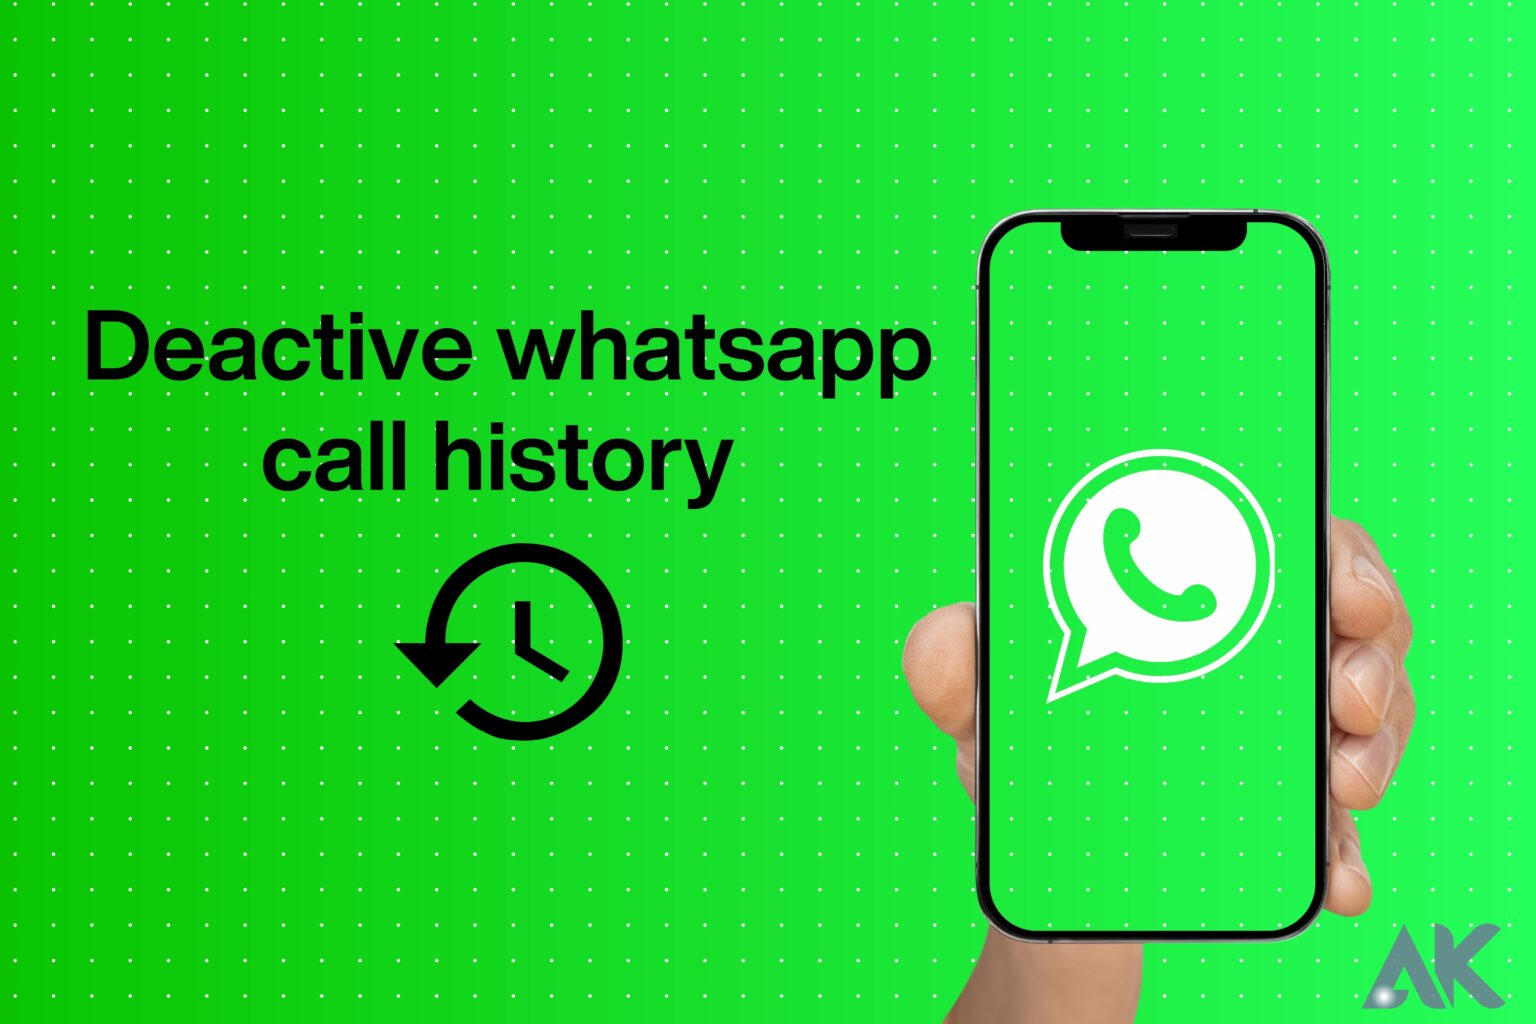 How to disable whatsApp call history iphone - 3 Easy Ways